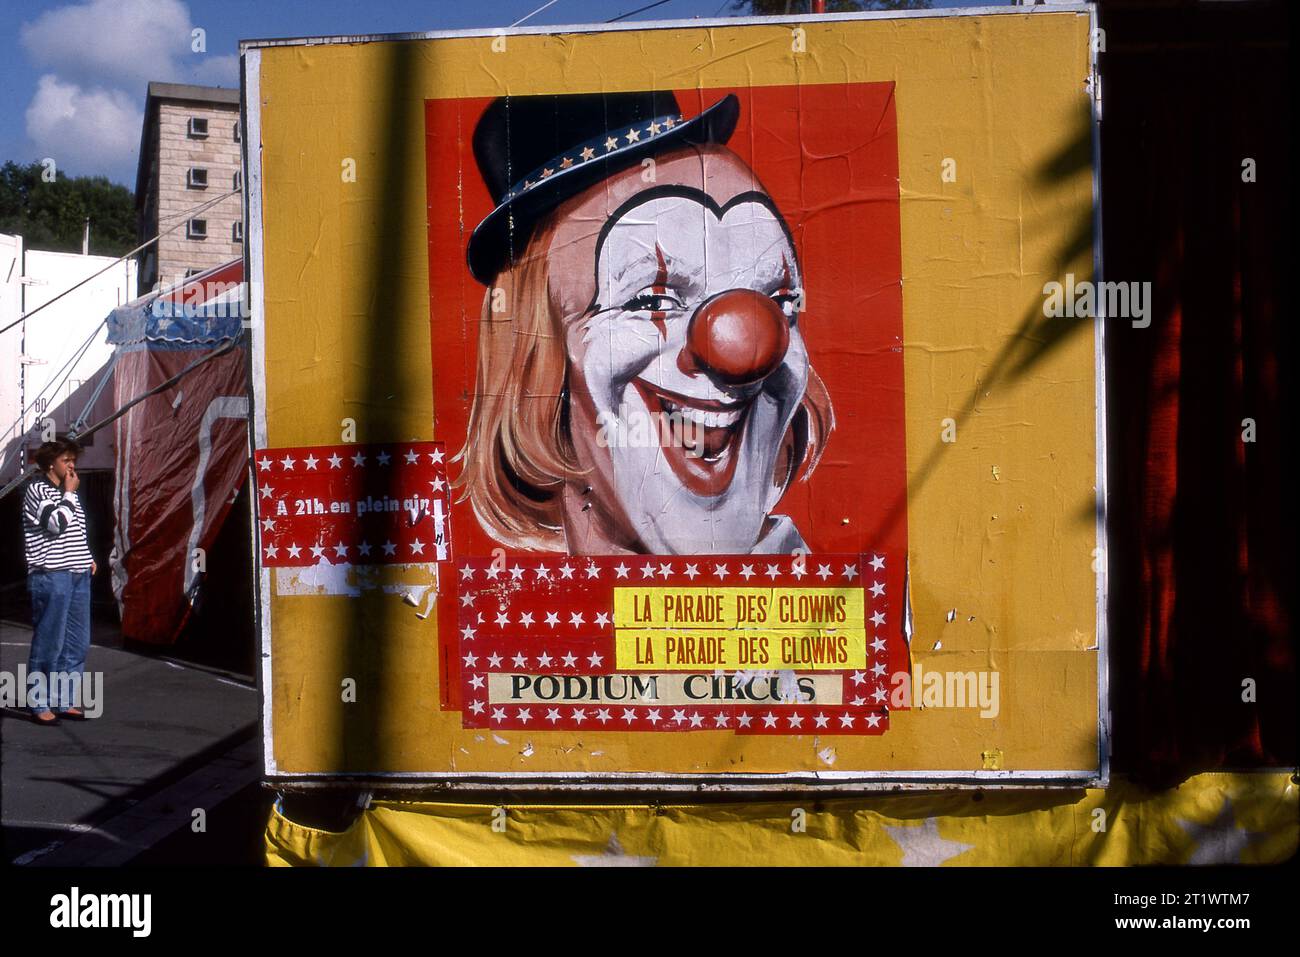 Circus poster depicting a classic clown in a small town outside Paris, France Stock Photo